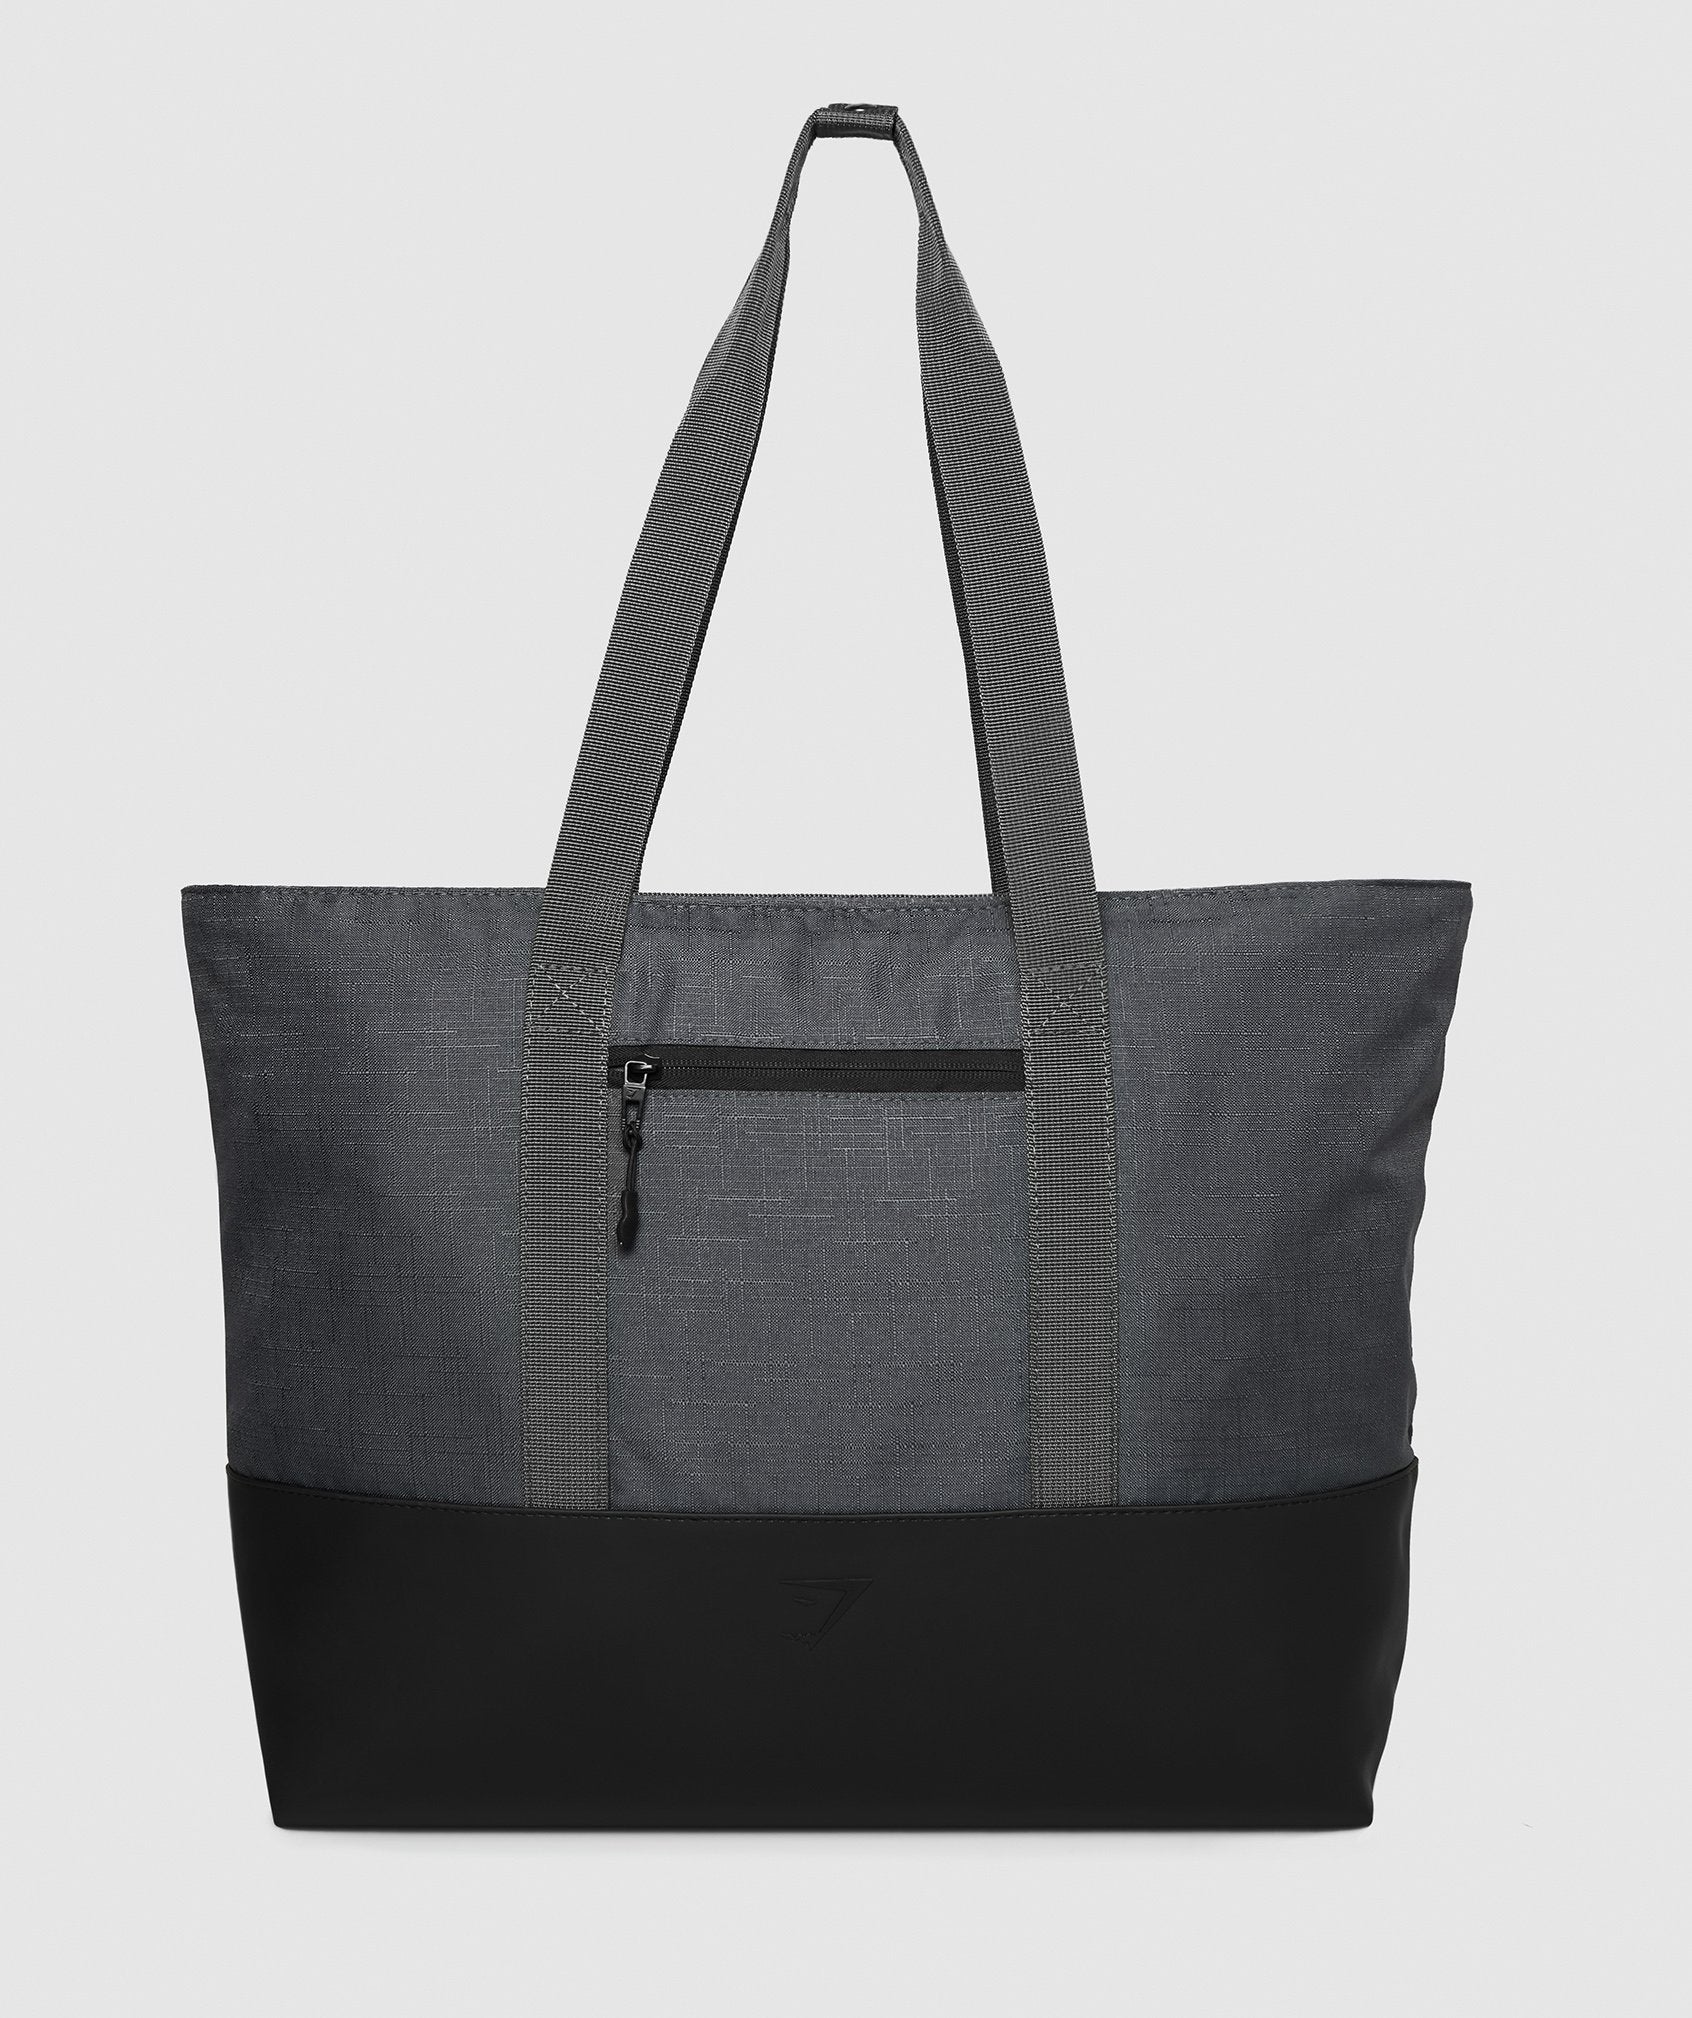 Tote Bag in Charcoal - view 2